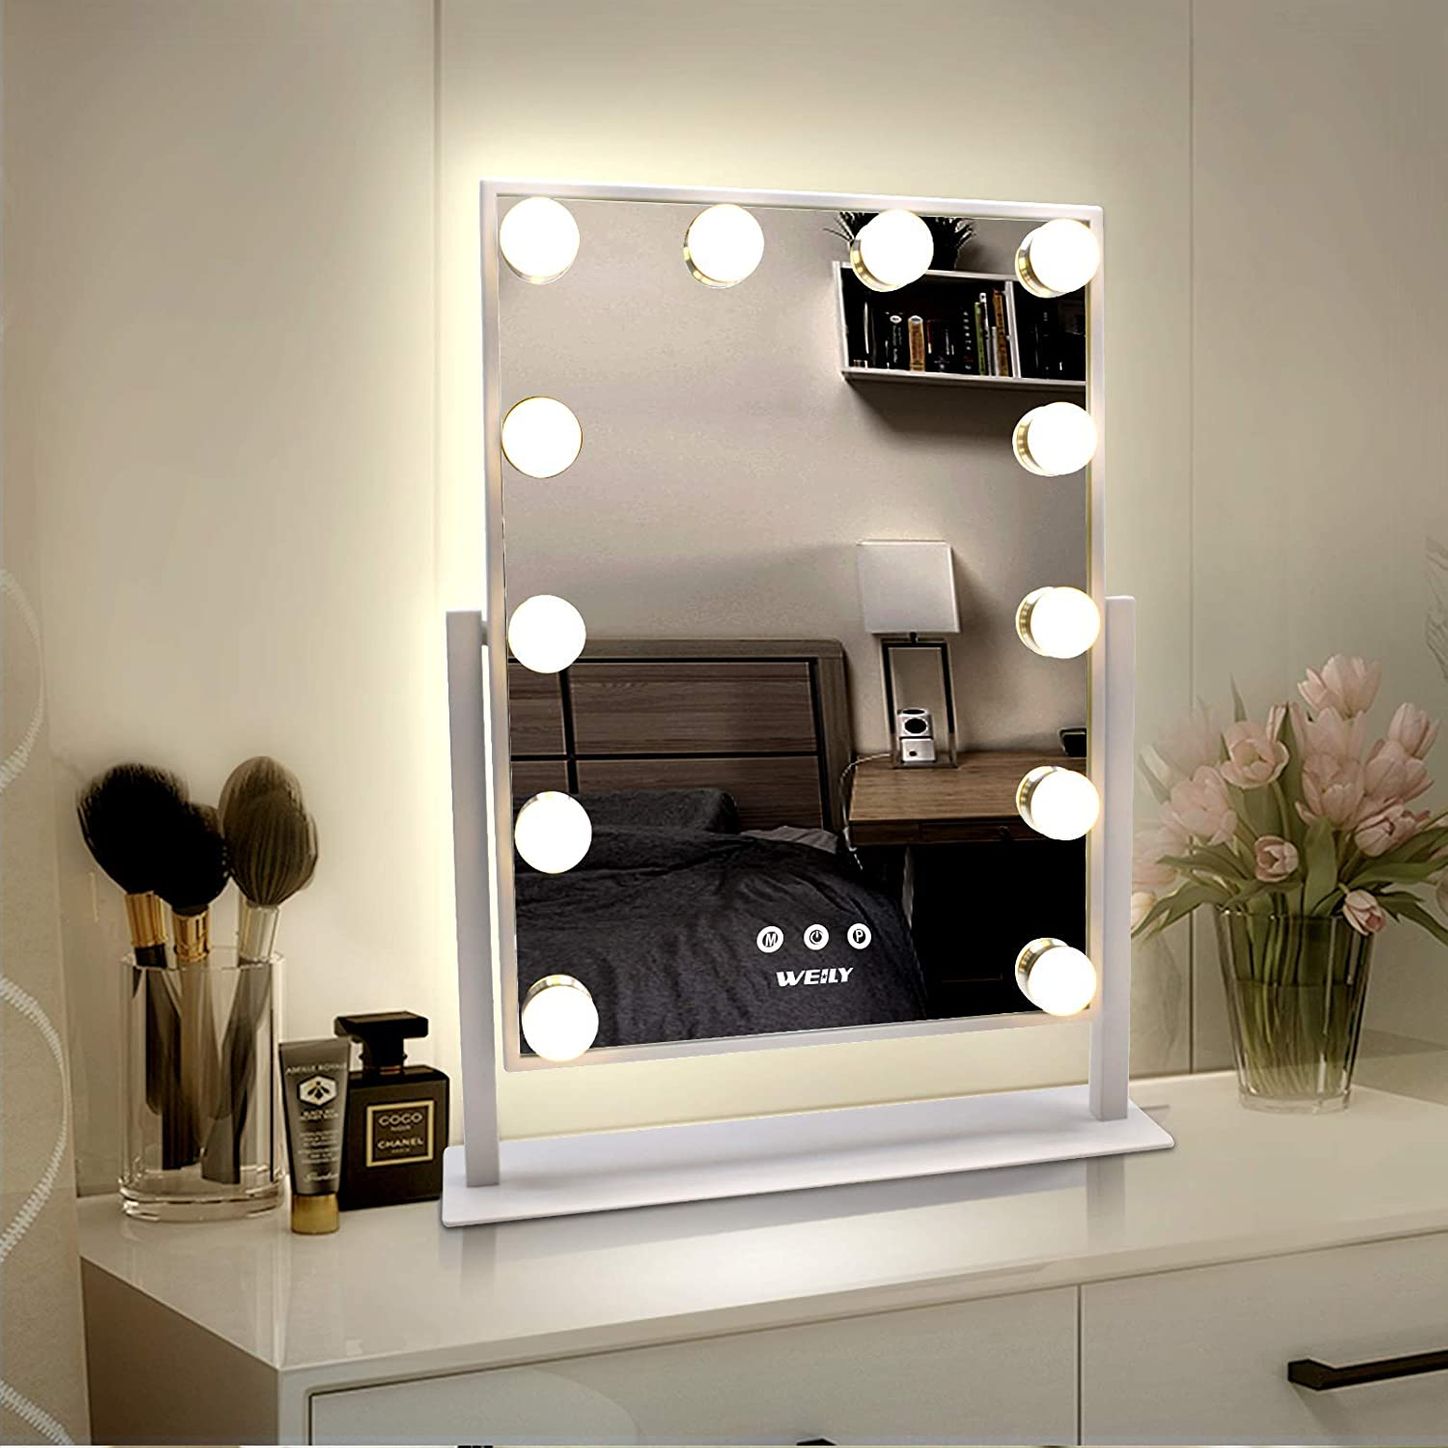 14 Best Lighted Makeup Mirrors 2021, What Is The Best Wall Mounted Makeup Mirror